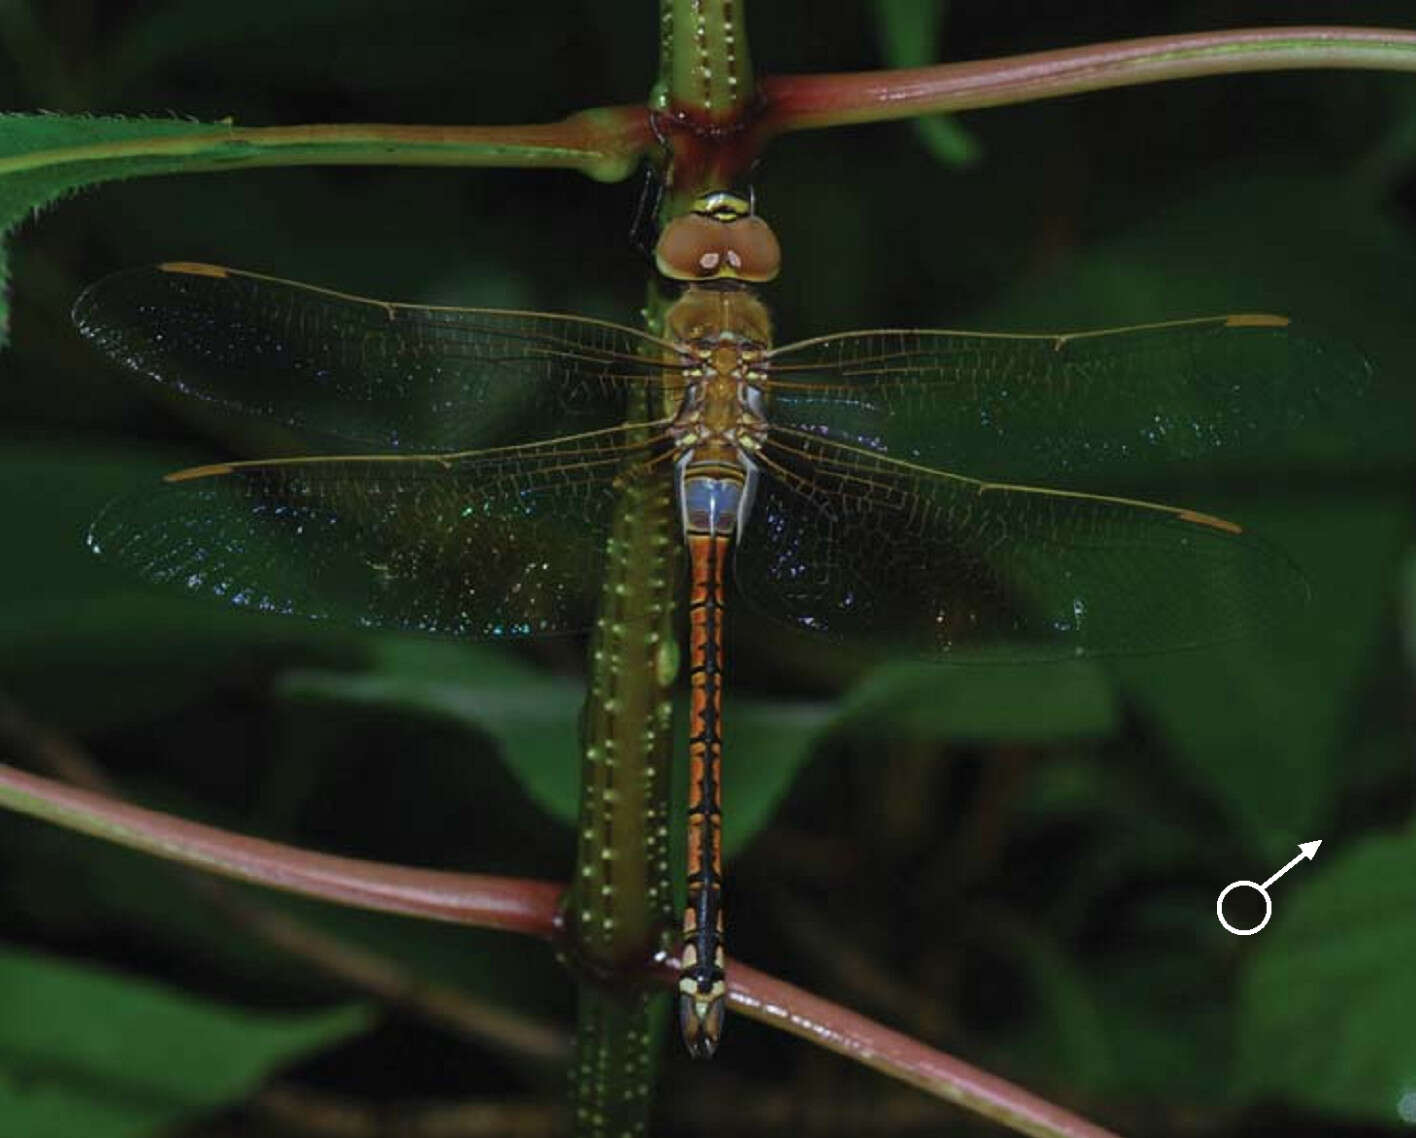 Image of Vagrant Emperor Dragonfly